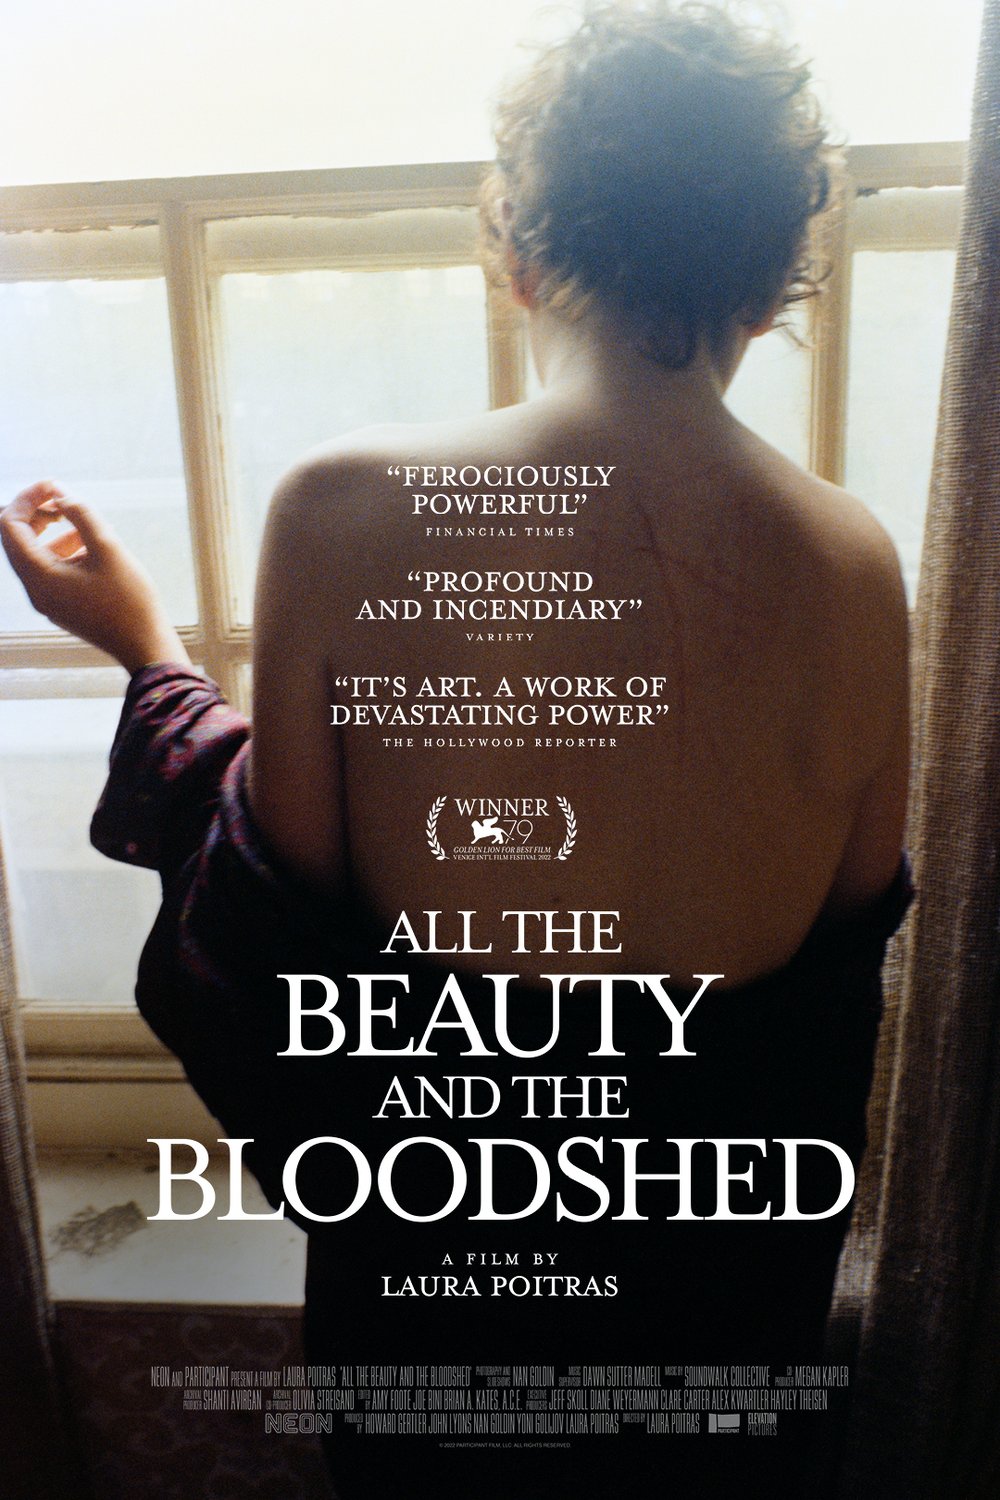 L'affiche du film All the Beauty and the Bloodshed